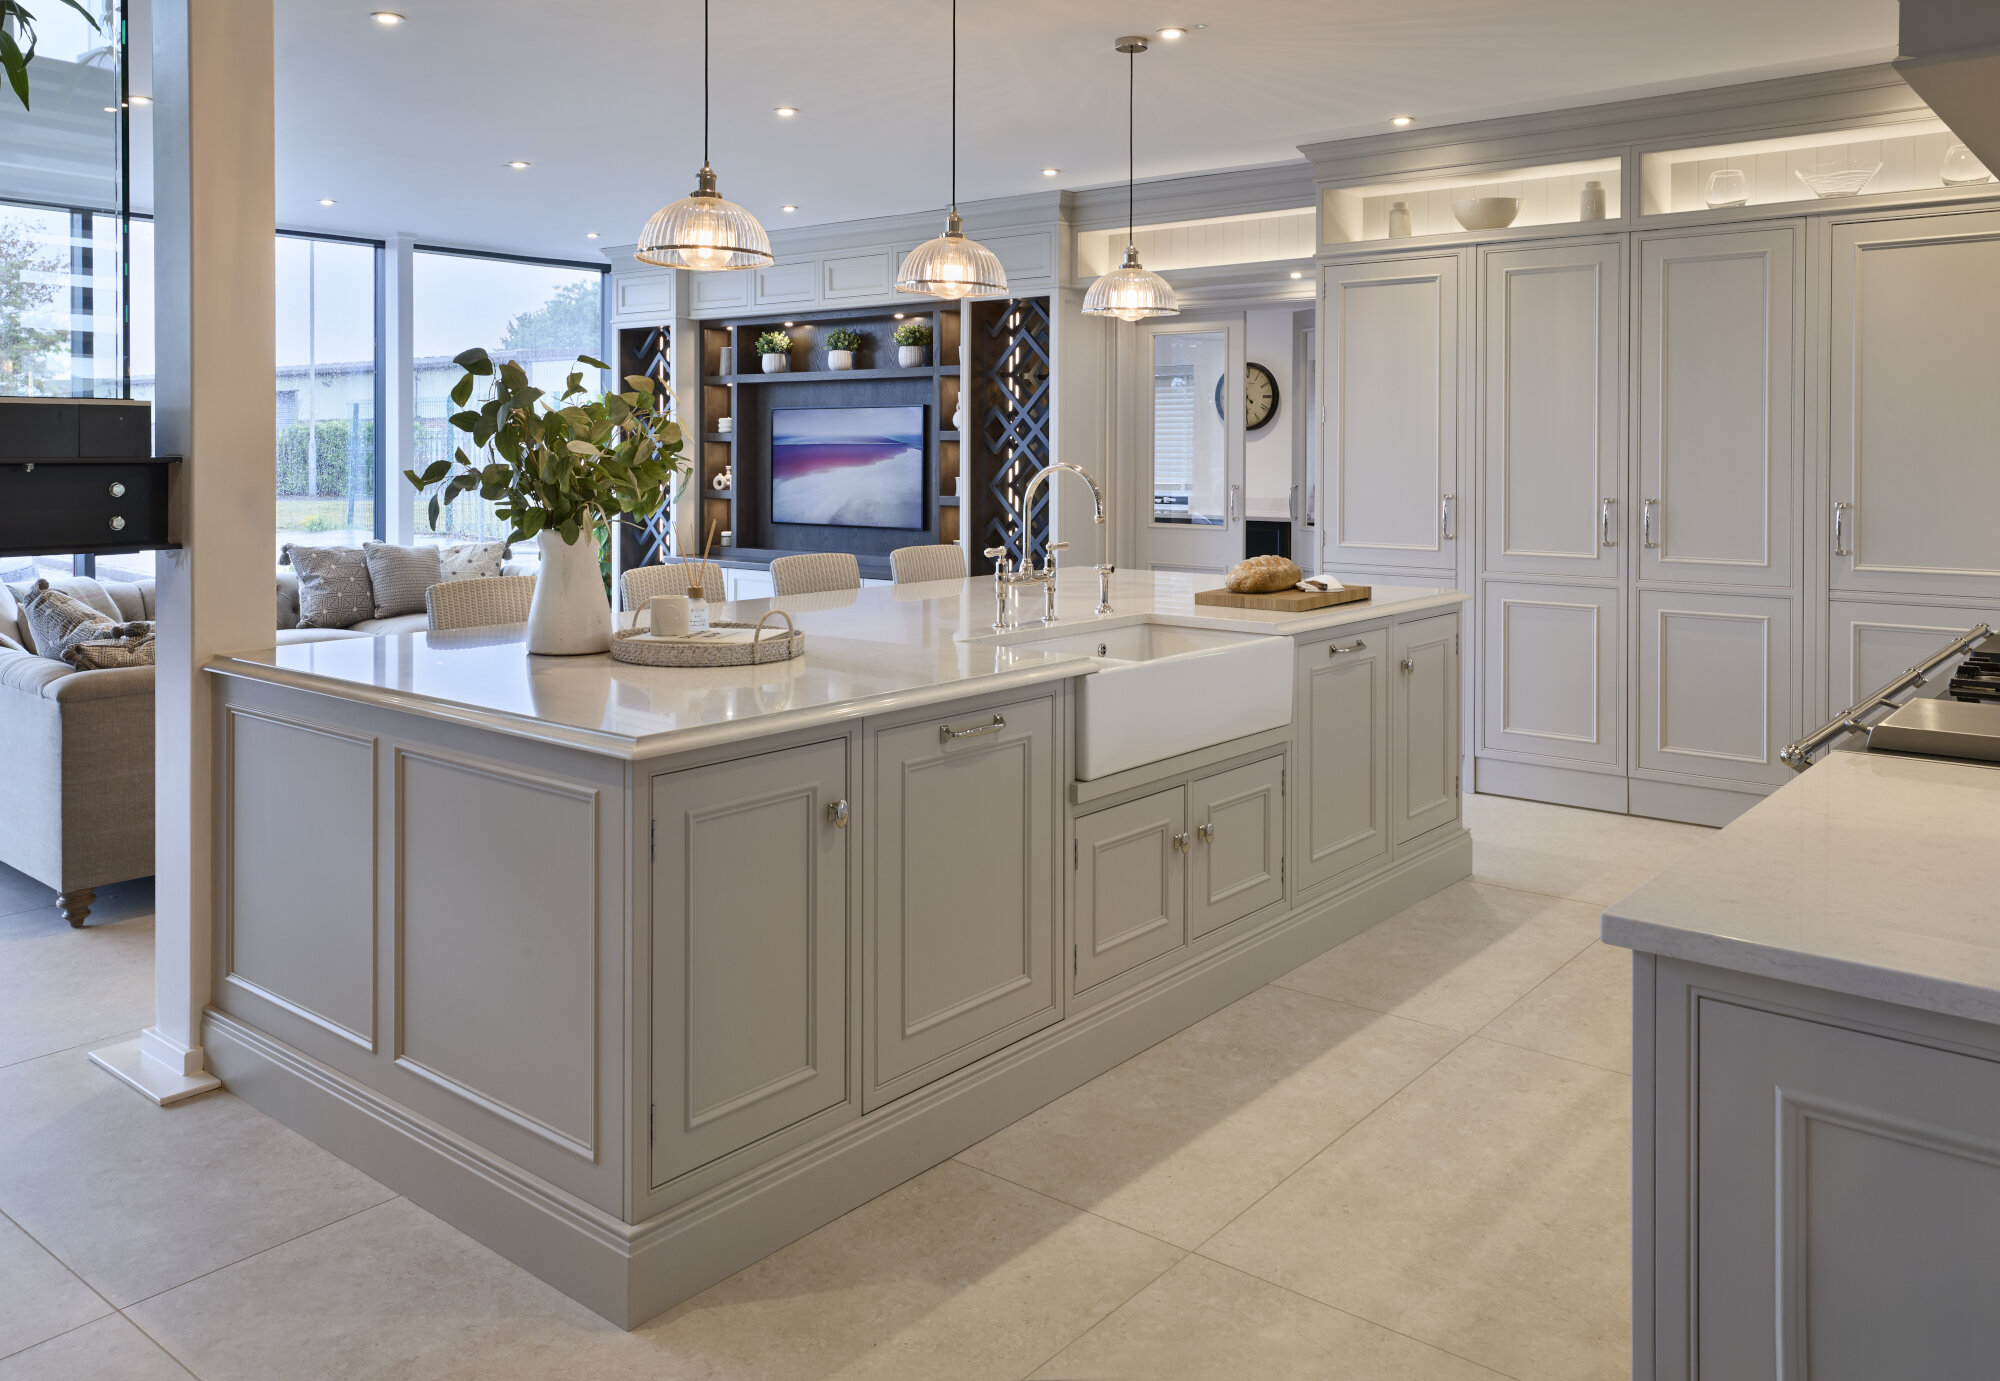 This Bespoke Kitchen Design is on display in our showroom near Loughborough